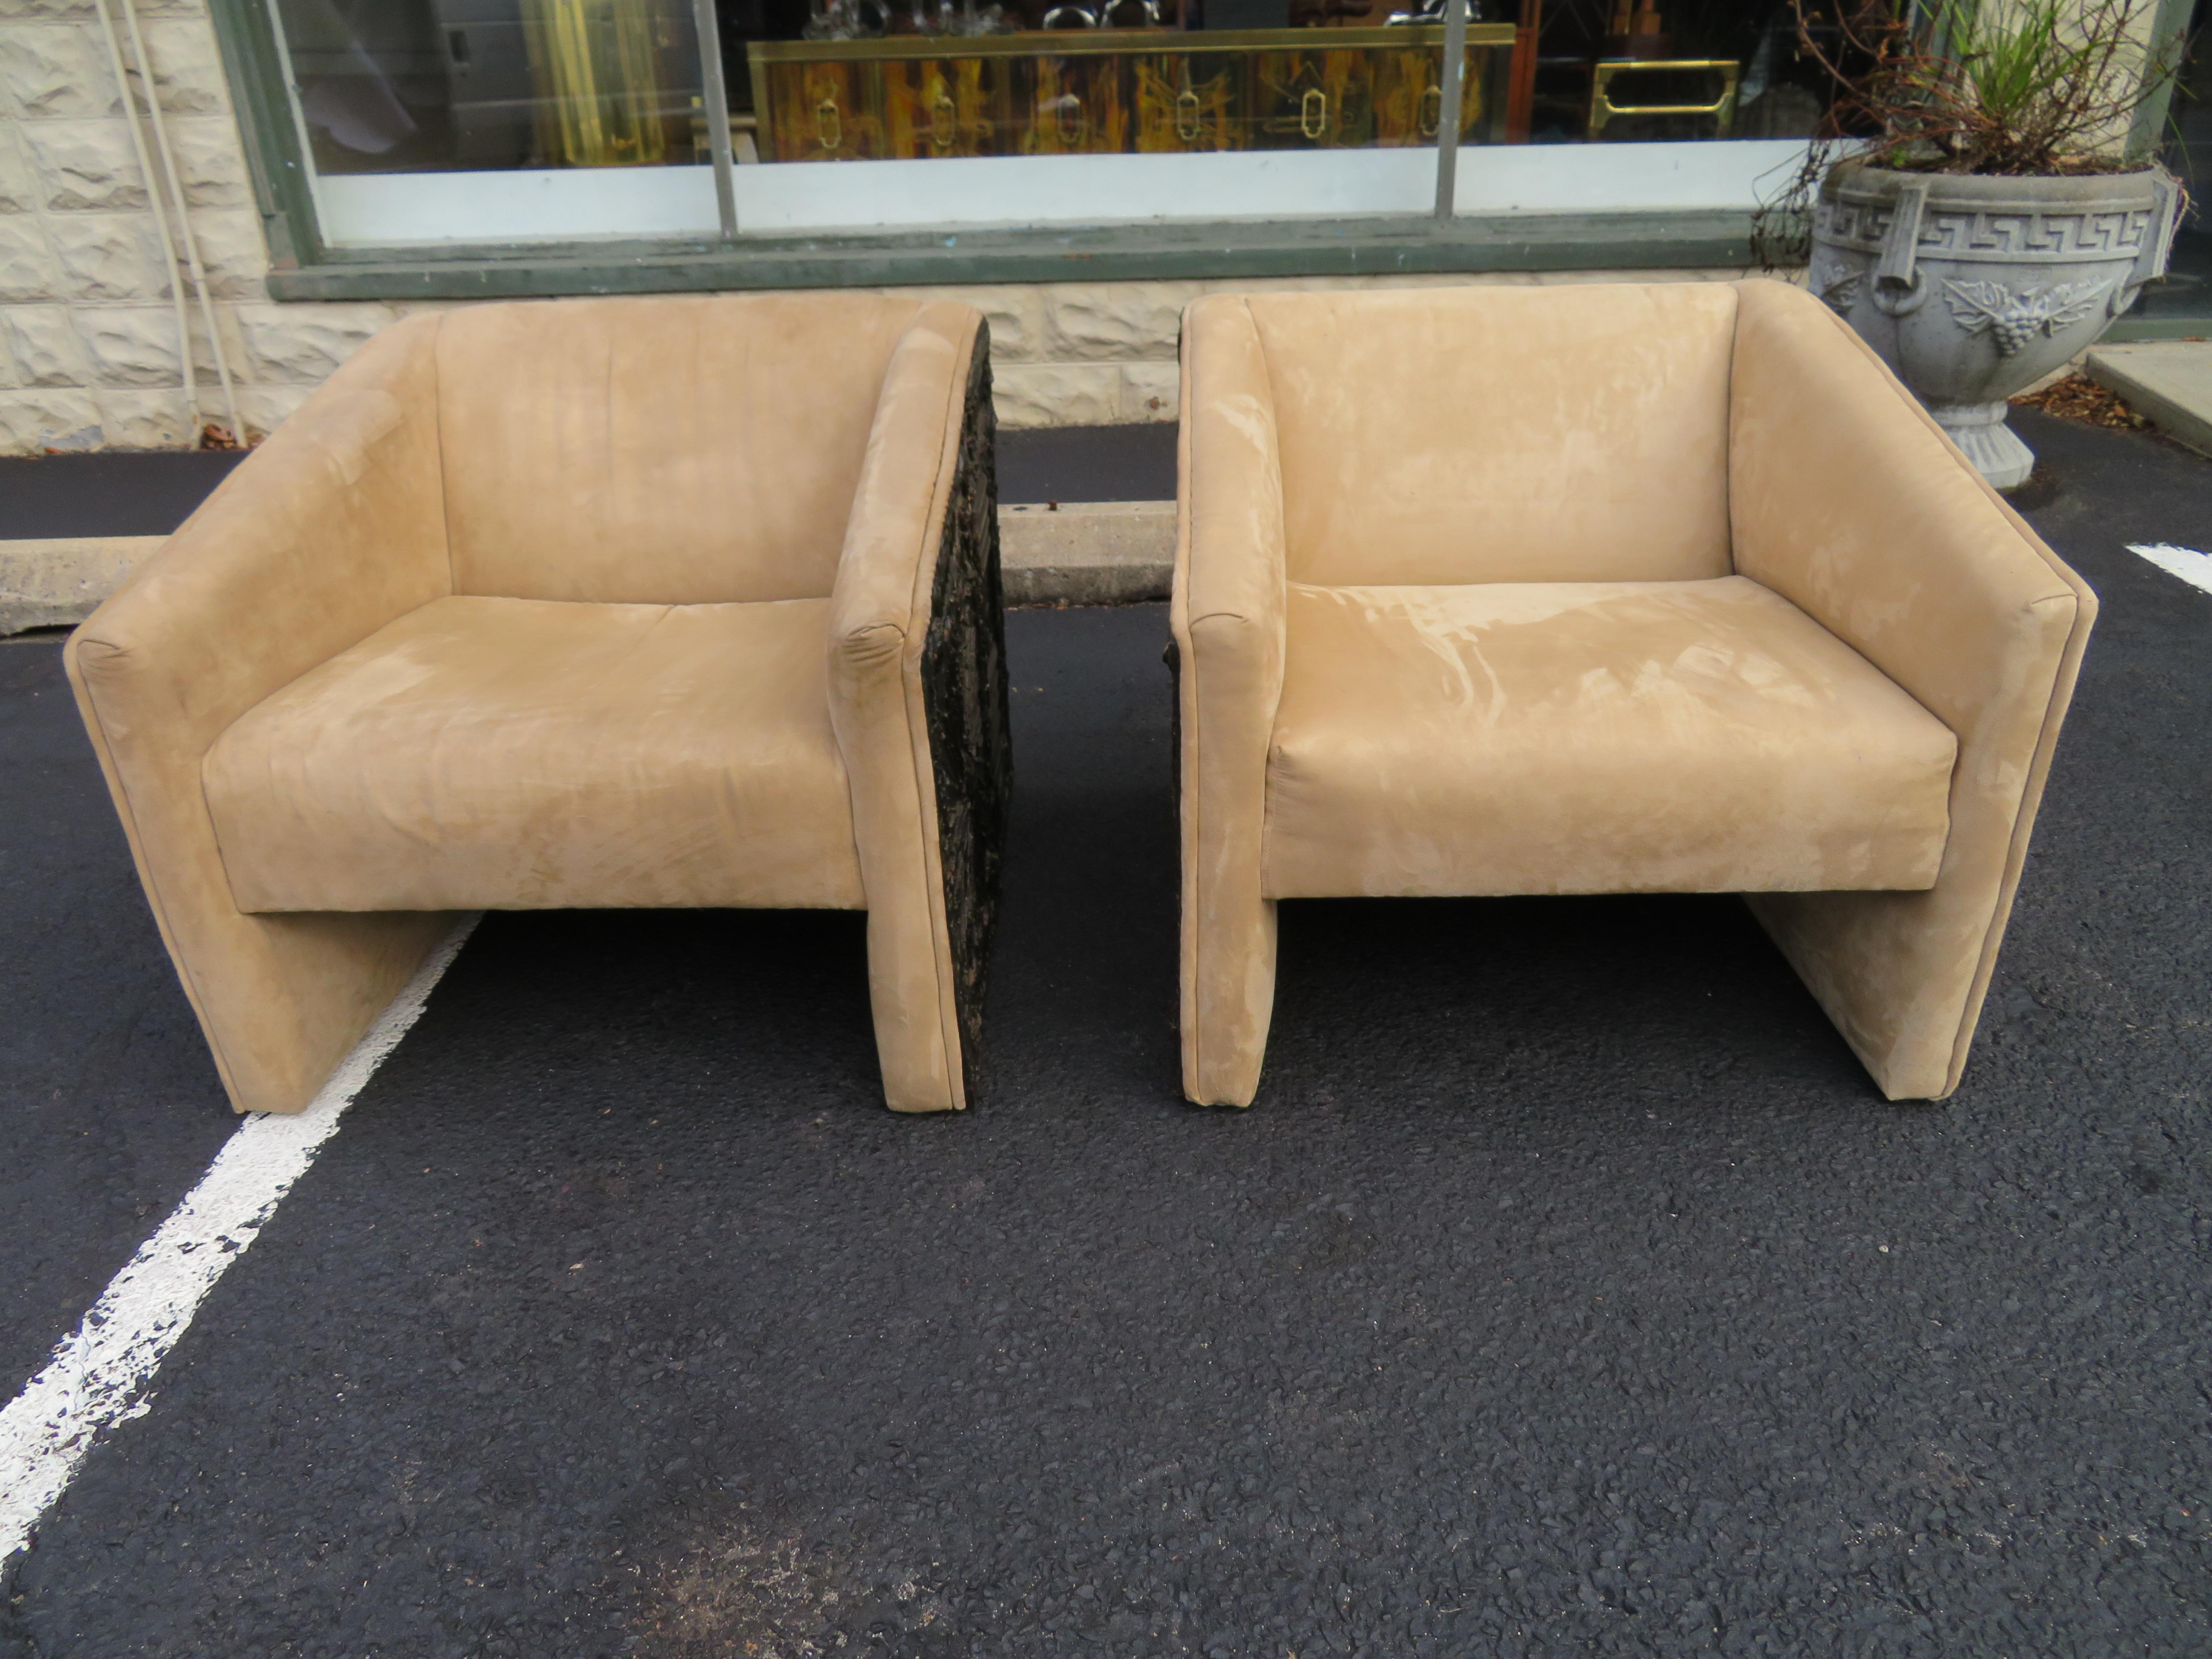 Fabulous and rare pair of Adrian Pearsall brutalist cube lounge chairs. This particular form is very rare and in our opinion undervalued right now in the market place. This pair will need to be re-upholstered but that's what you designers are